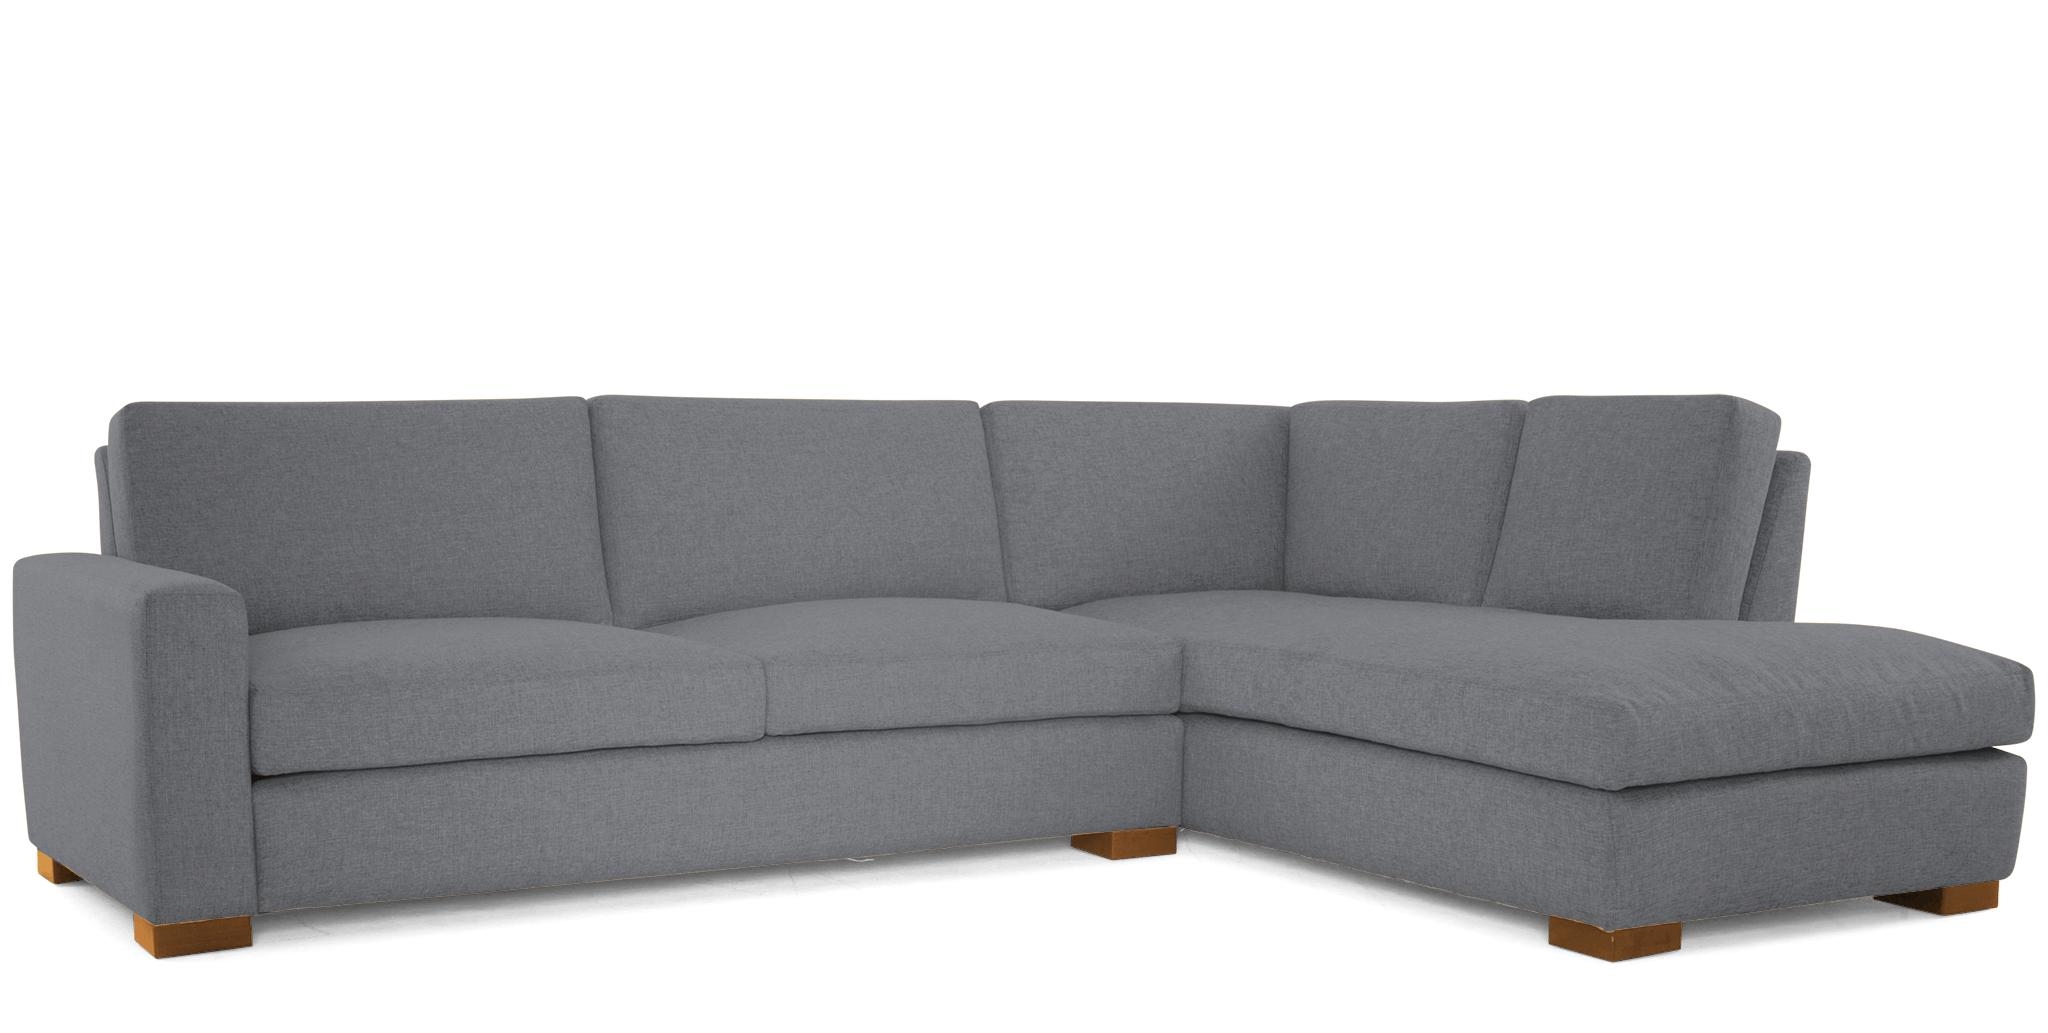 Gray Anton Mid Century Modern Sectional with Bumper - Essence Ash - Mocha - Right  - Image 1